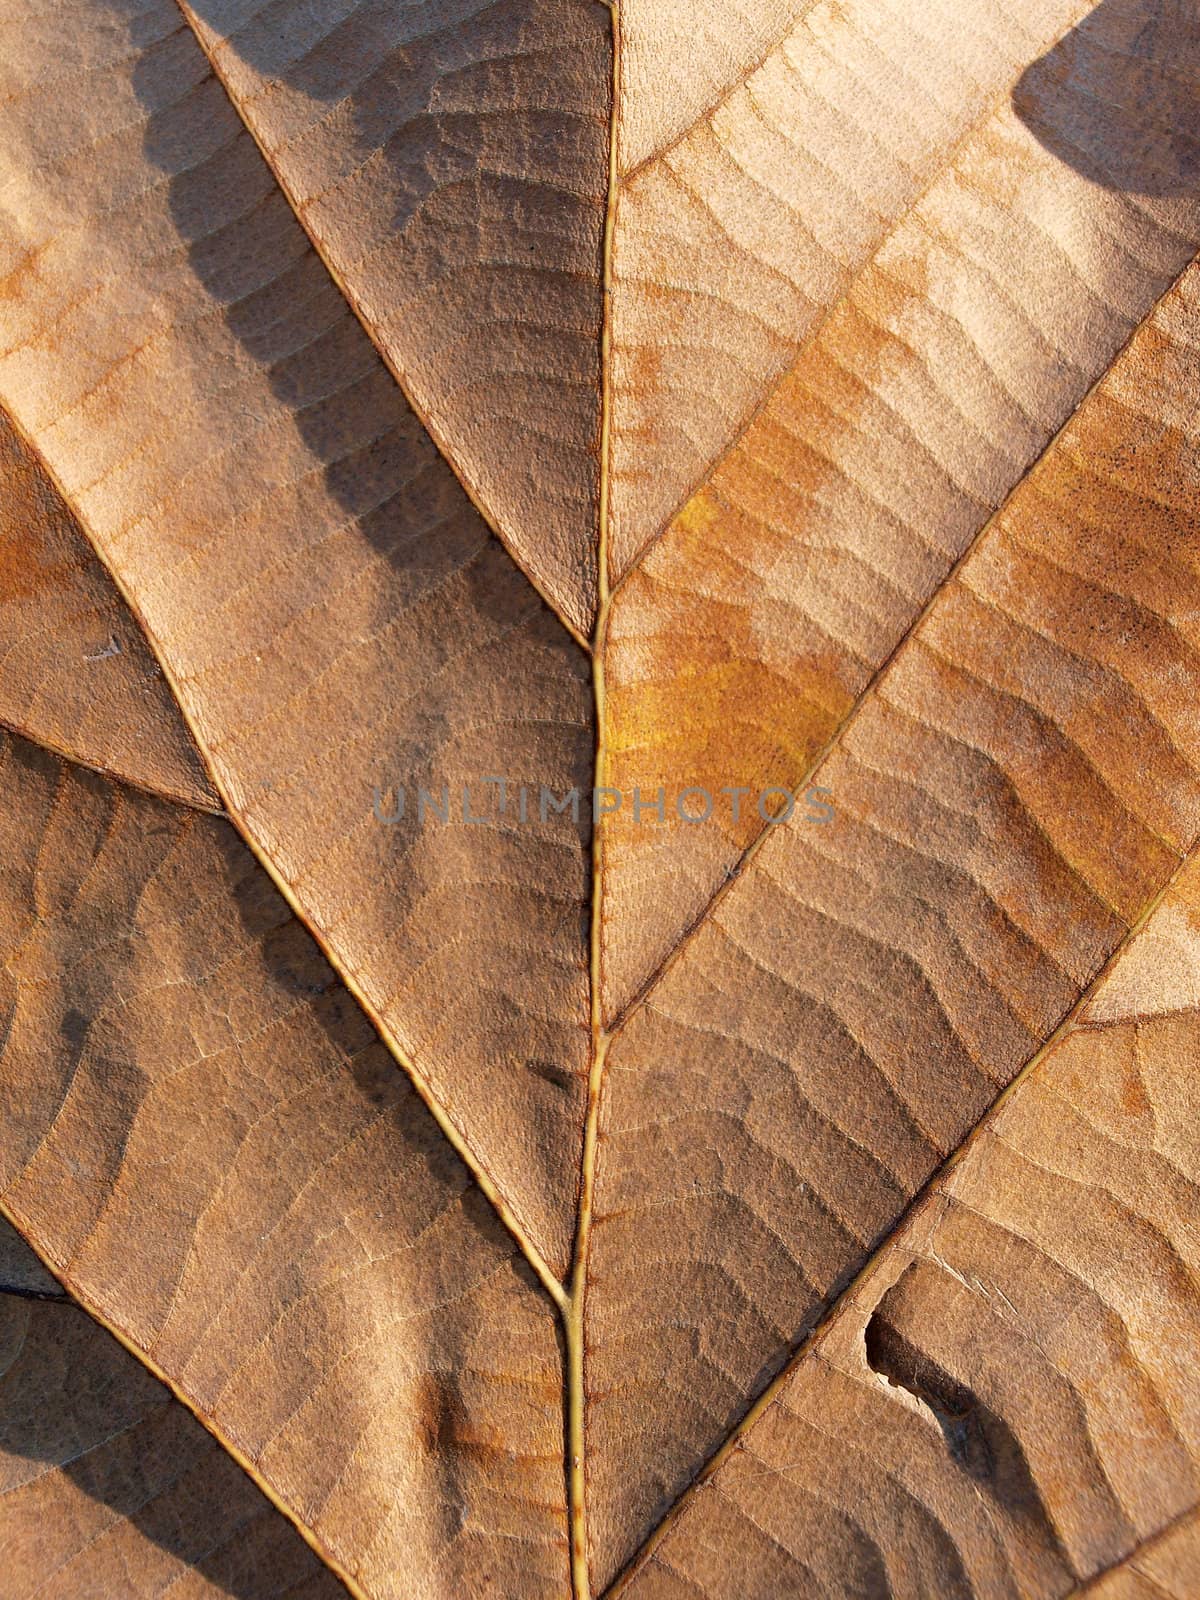 dry leaf on textured paper (vertical)